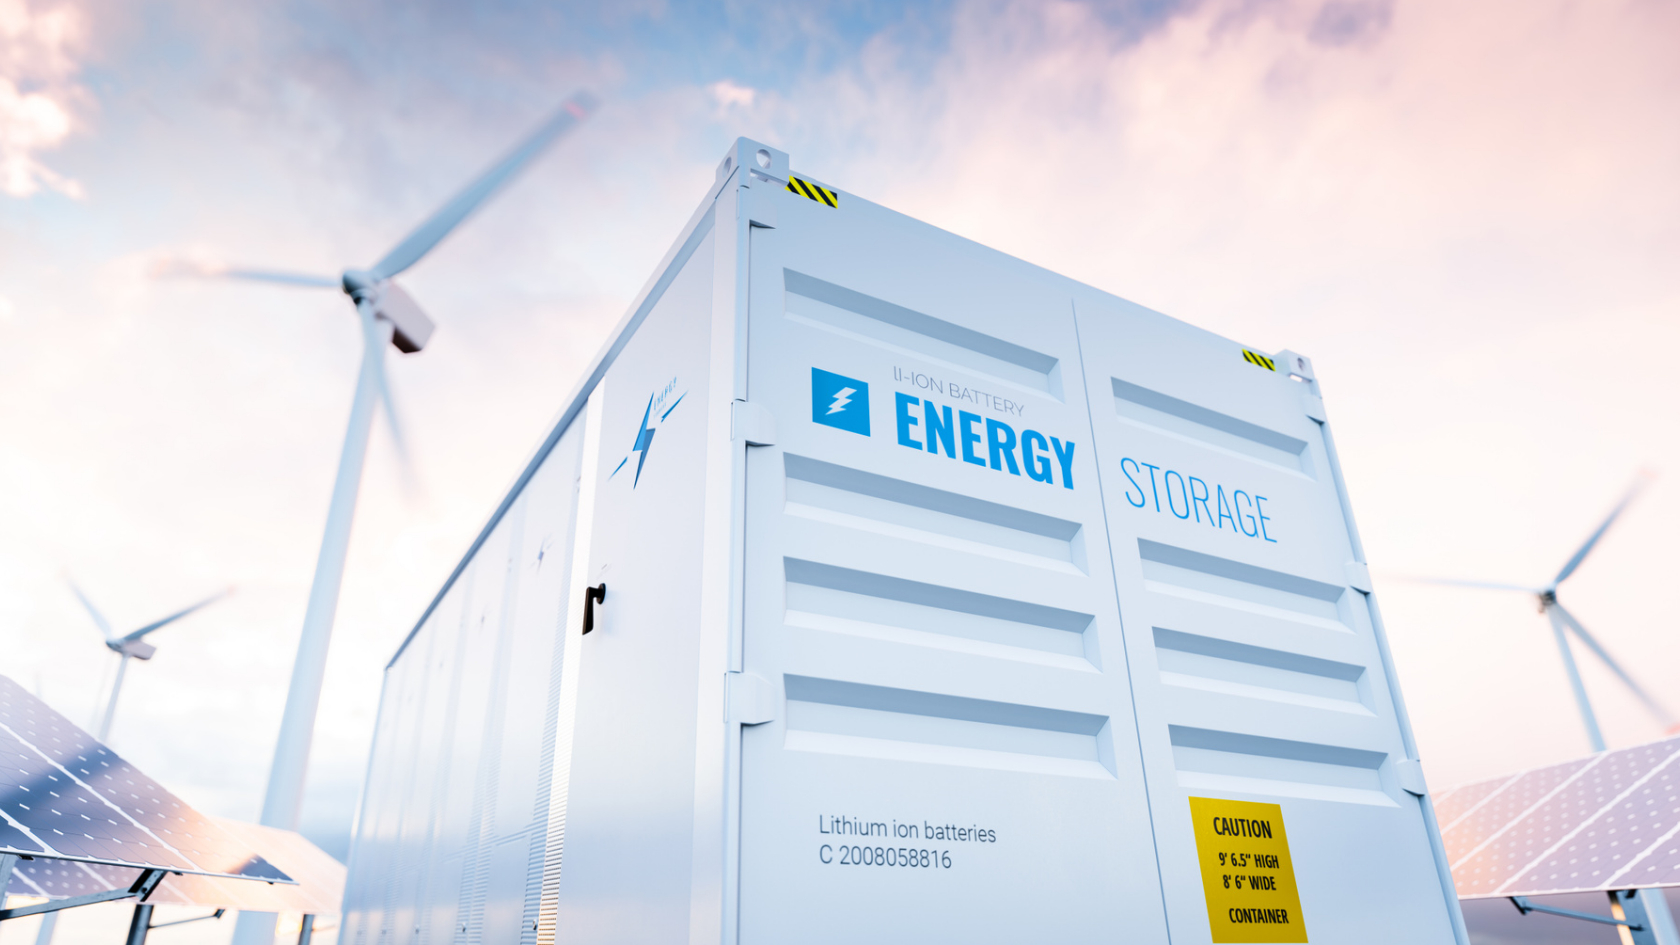 Finish Utility Helen is Launching a 40 MW BESS in Finland